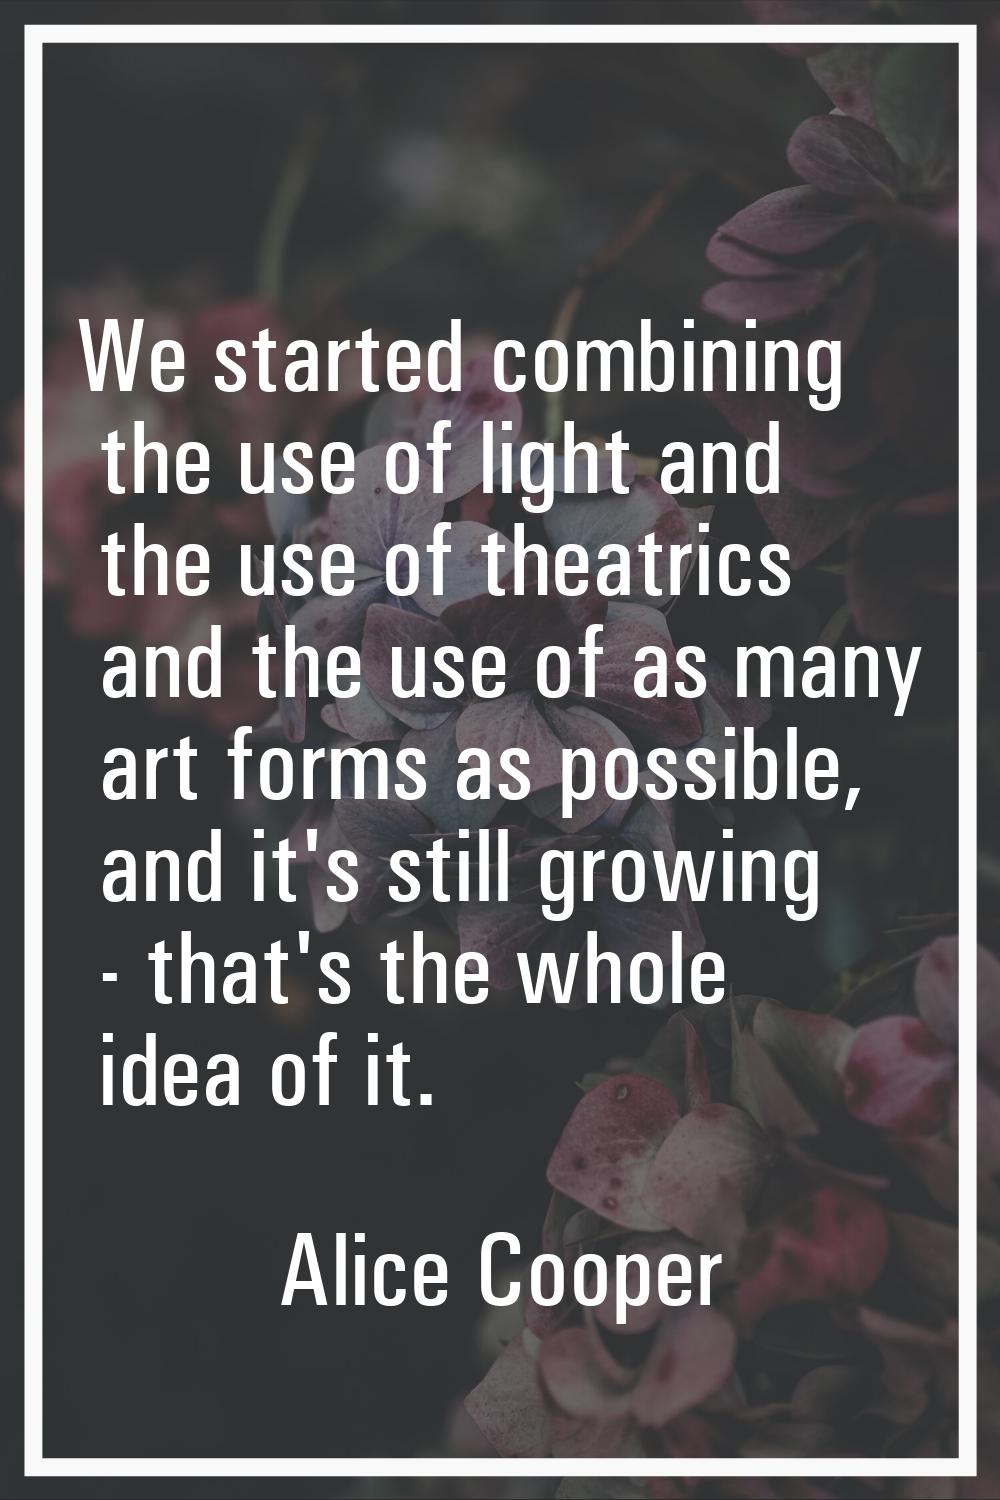 We started combining the use of light and the use of theatrics and the use of as many art forms as 